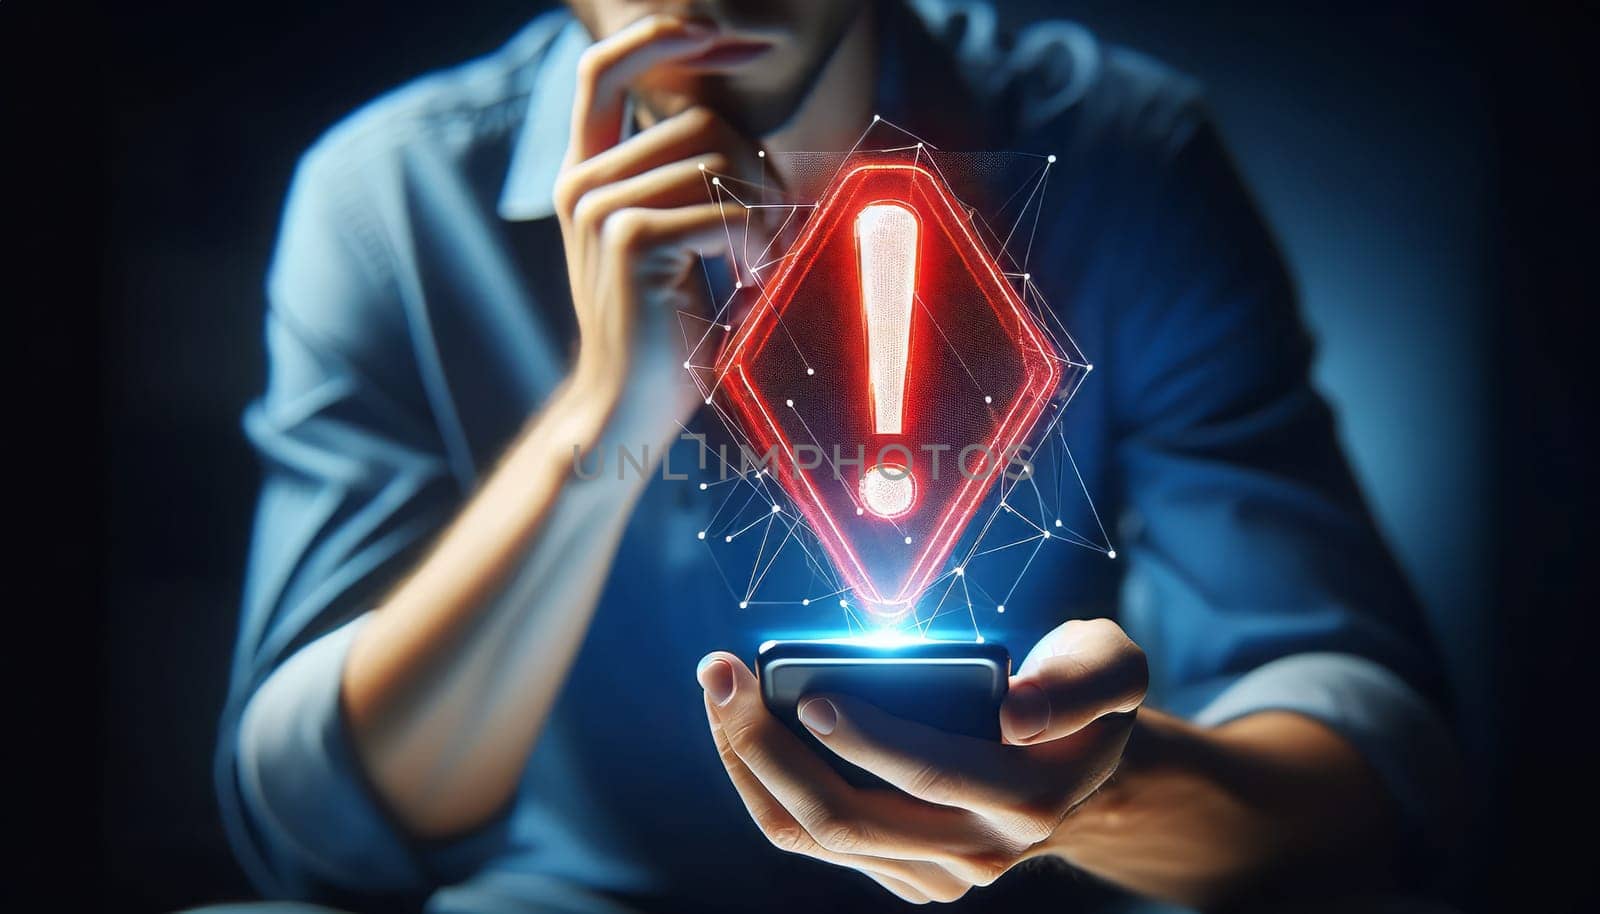 A man holds a smartphone displaying a glowing red exclamation mark, symbolizing a critical alert or an urgent security warning in a digital space